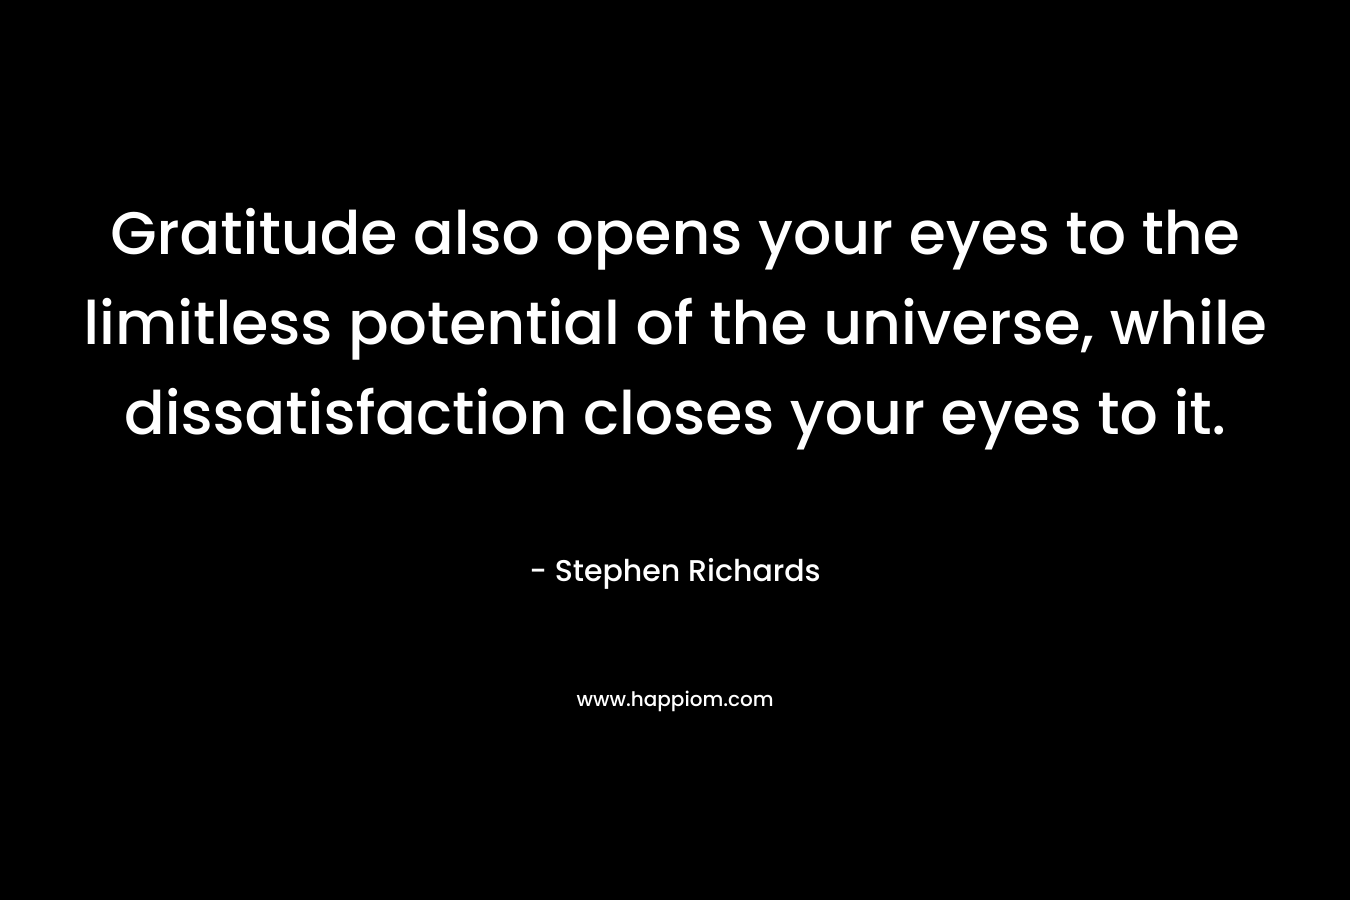 Gratitude also opens your eyes to the limitless potential of the universe, while dissatisfaction closes your eyes to it.